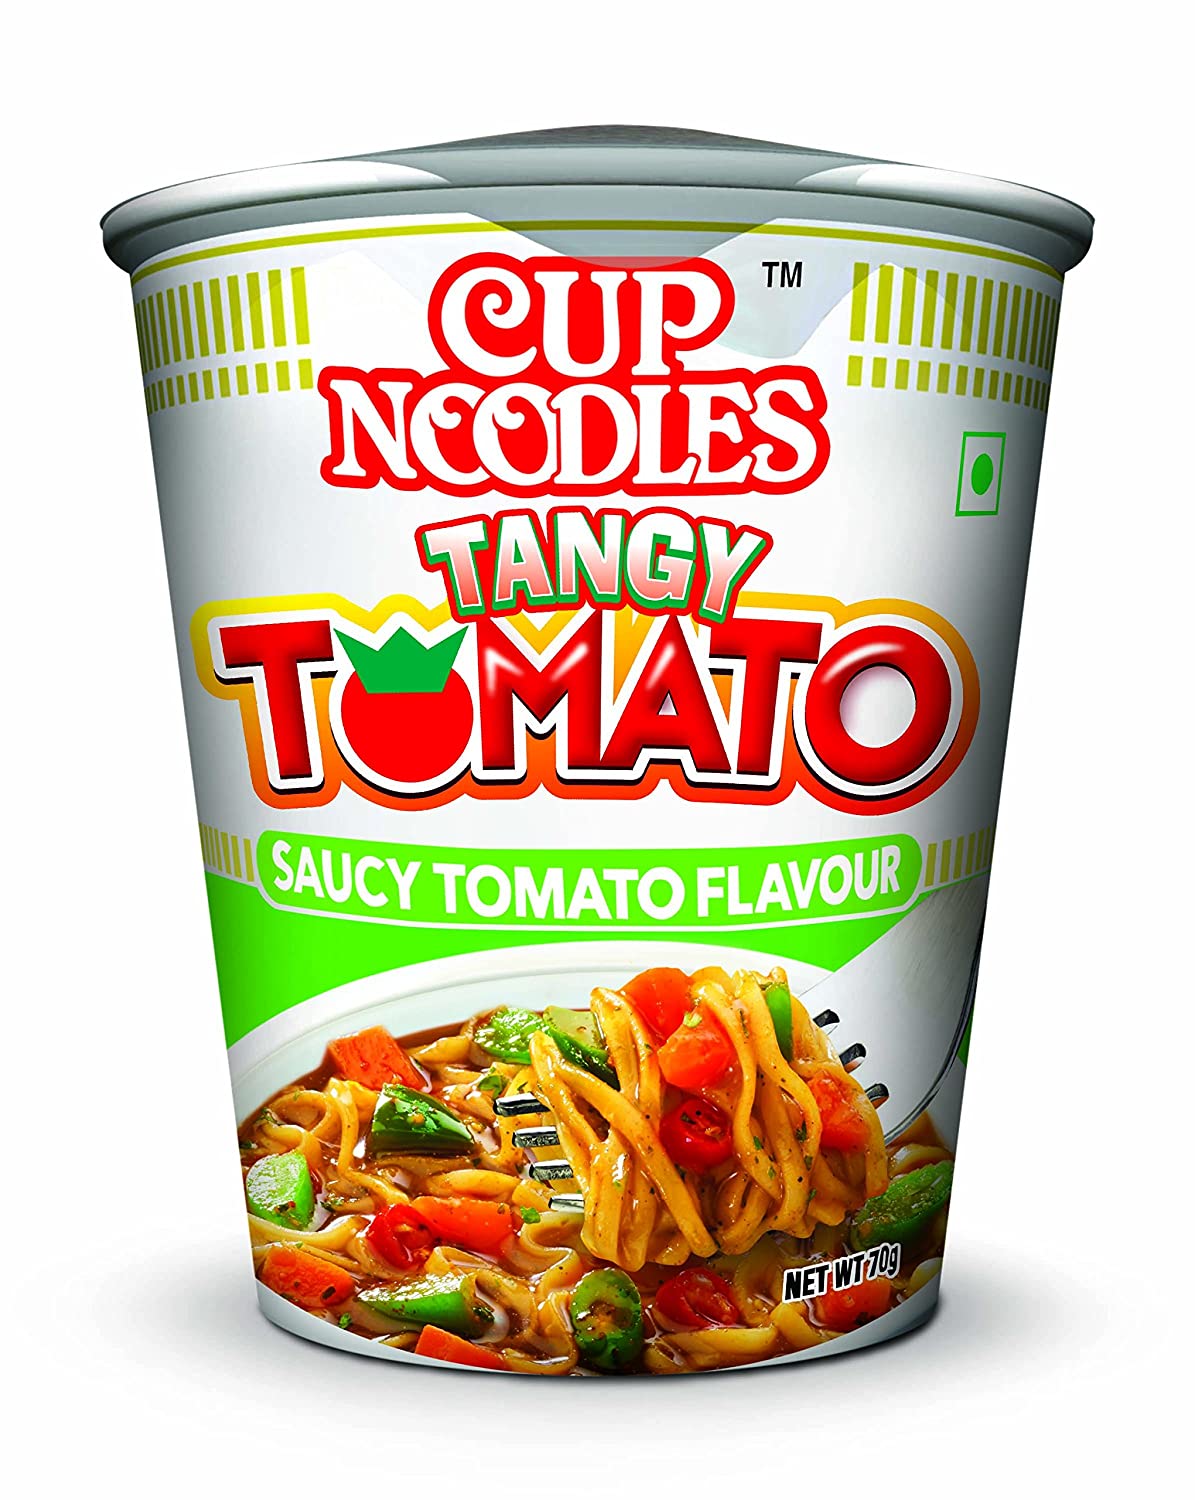 Cup Noodles Tangy Tomato Image